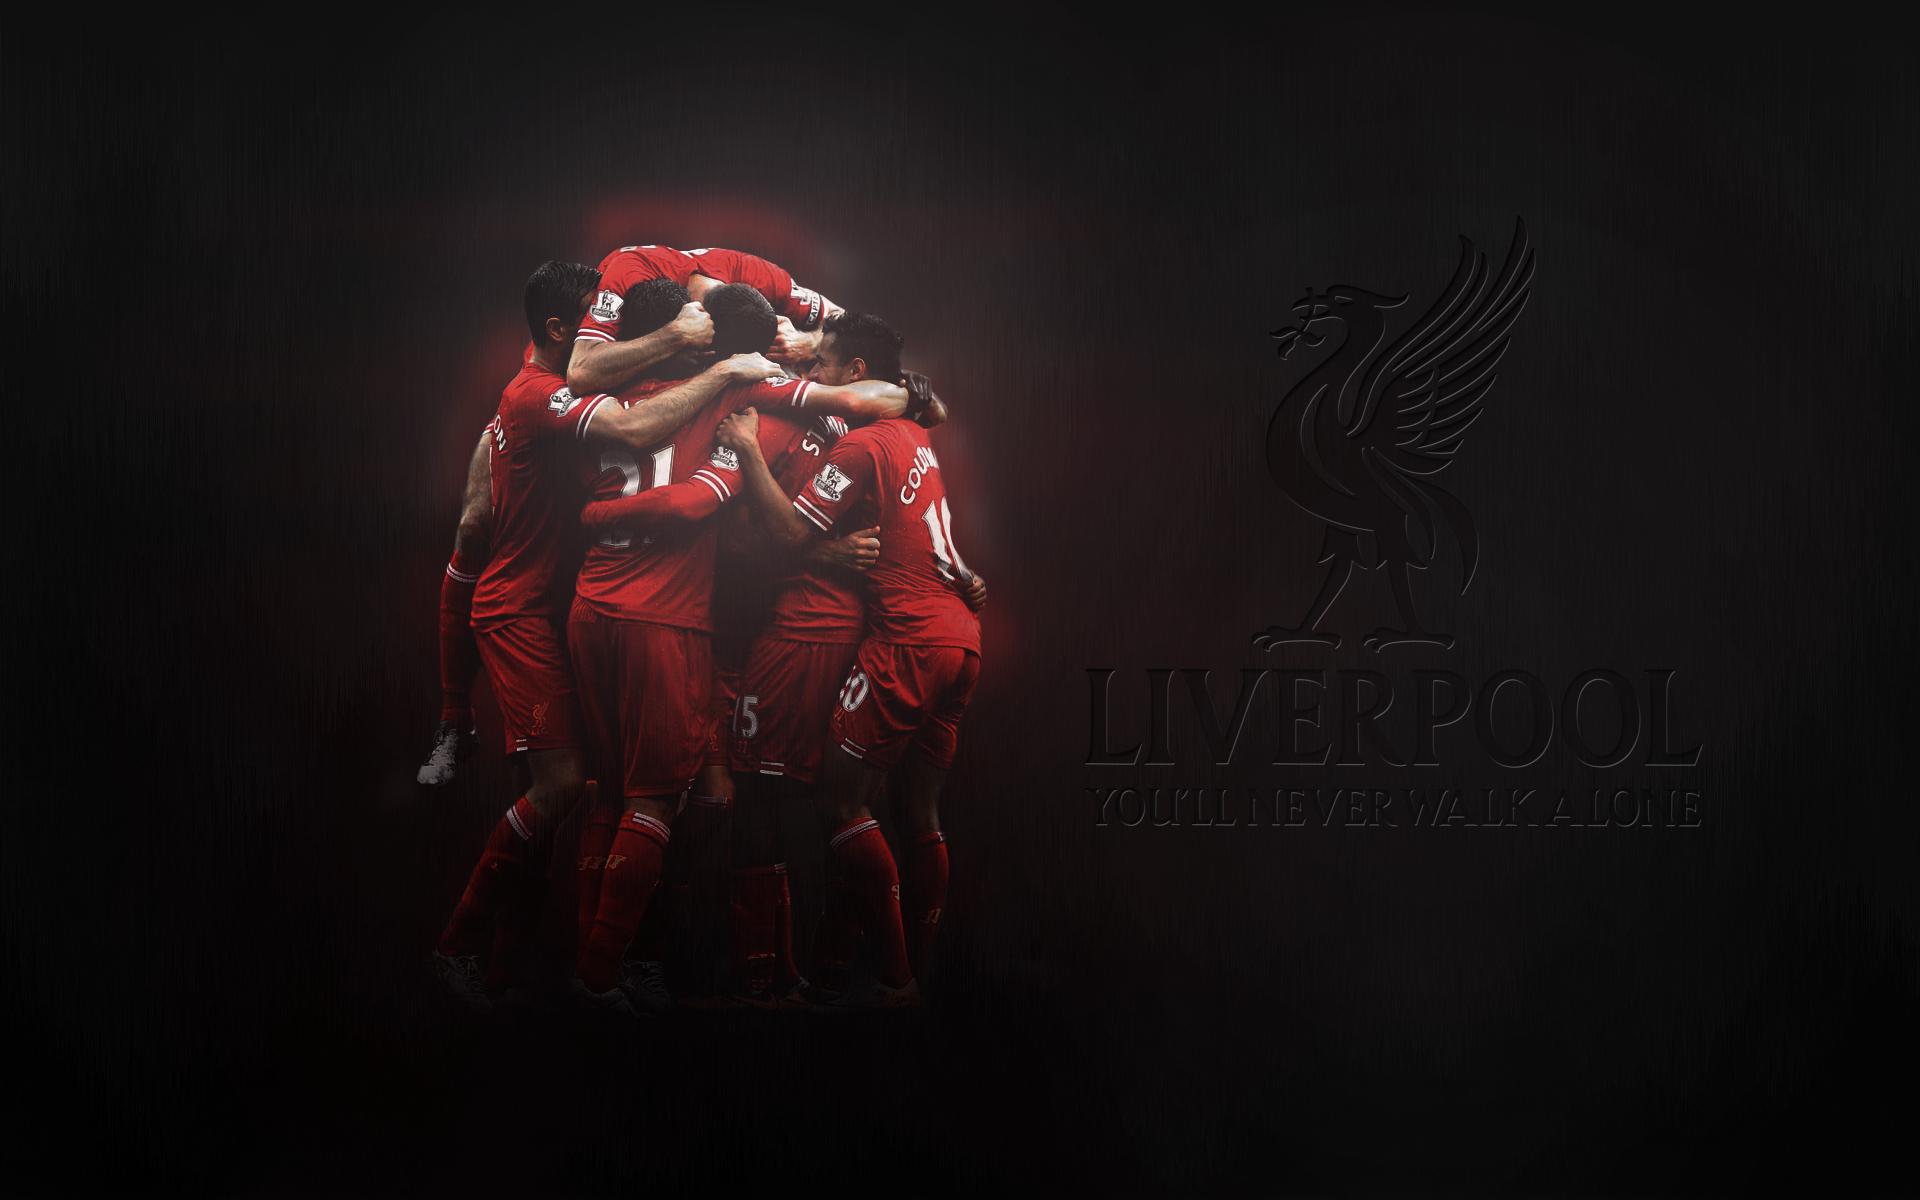 Liverpool Fc Wallpapers